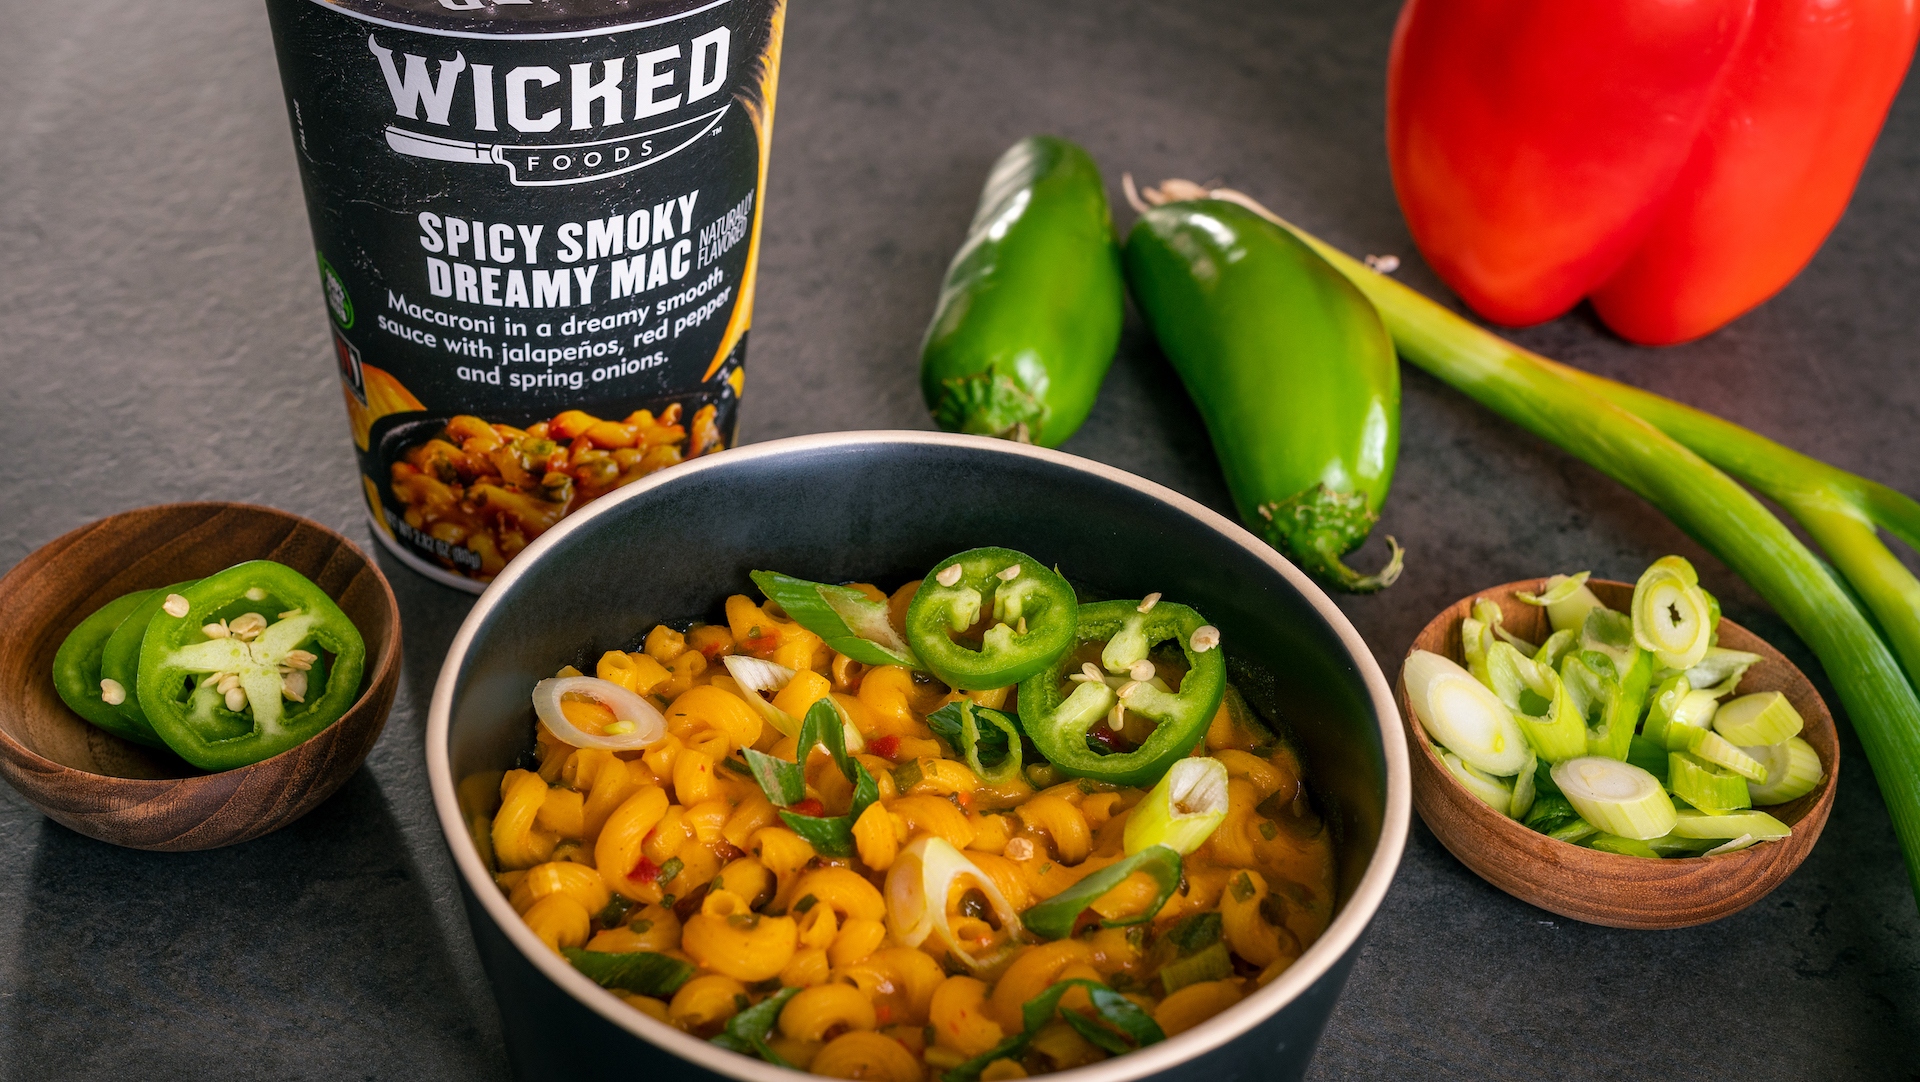 Wicked Kitchen offers chef-created meals in minutes that are 100% plant-based.